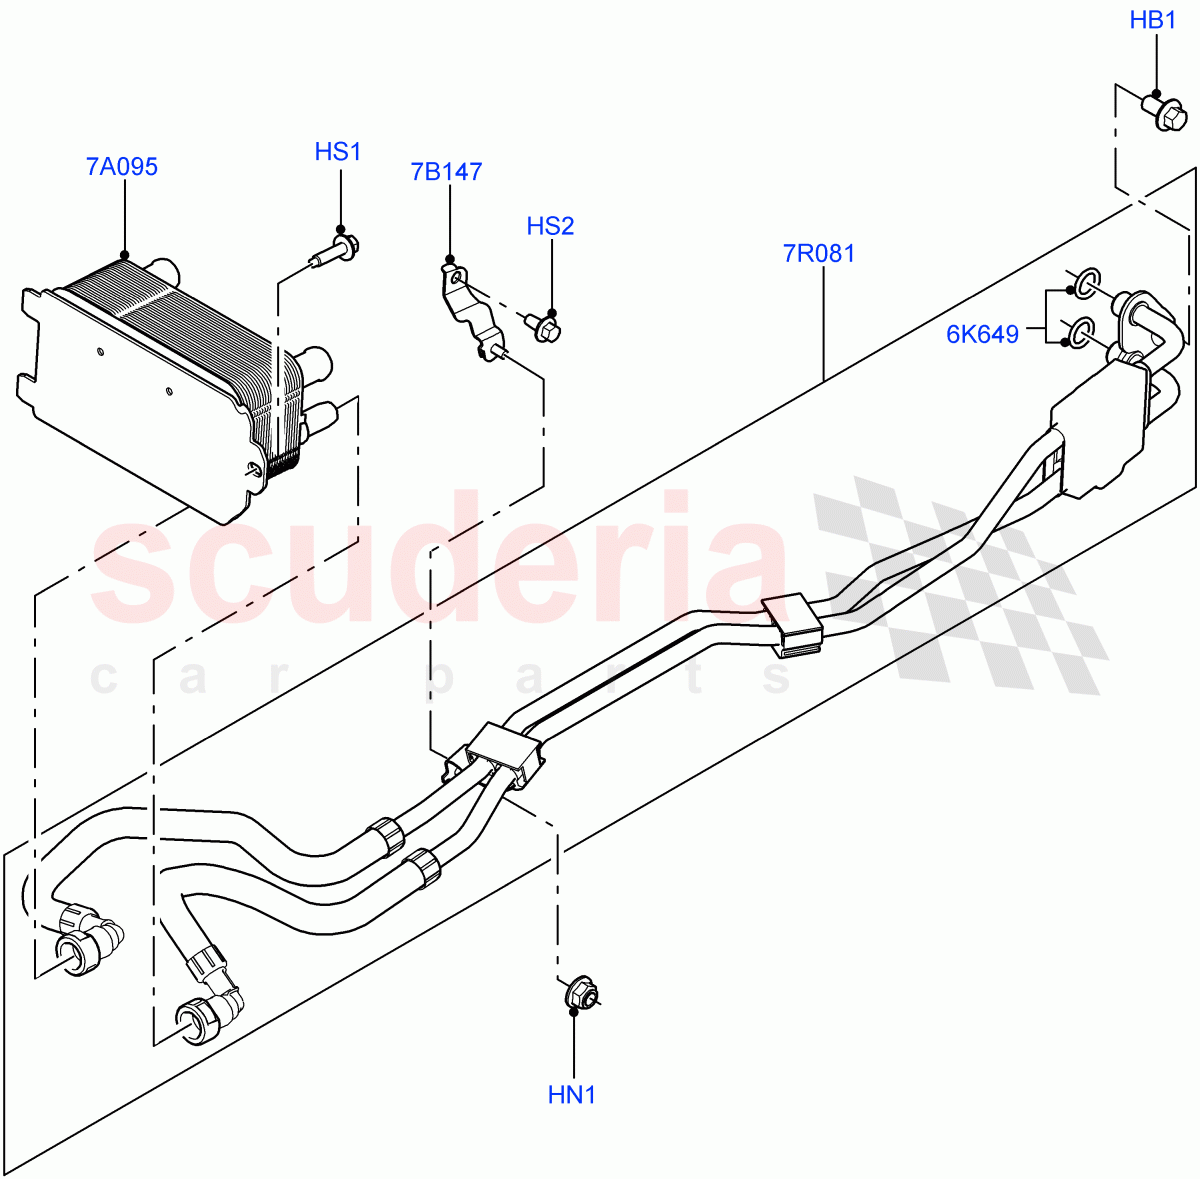 Transmission Cooling Systems(4.4L DOHC DITC V8 Diesel,8 Speed Auto Trans ZF 8HP76)((V)FROMKA000001) of Land Rover Land Rover Range Rover Sport (2014+) [4.4 DOHC Diesel V8 DITC]